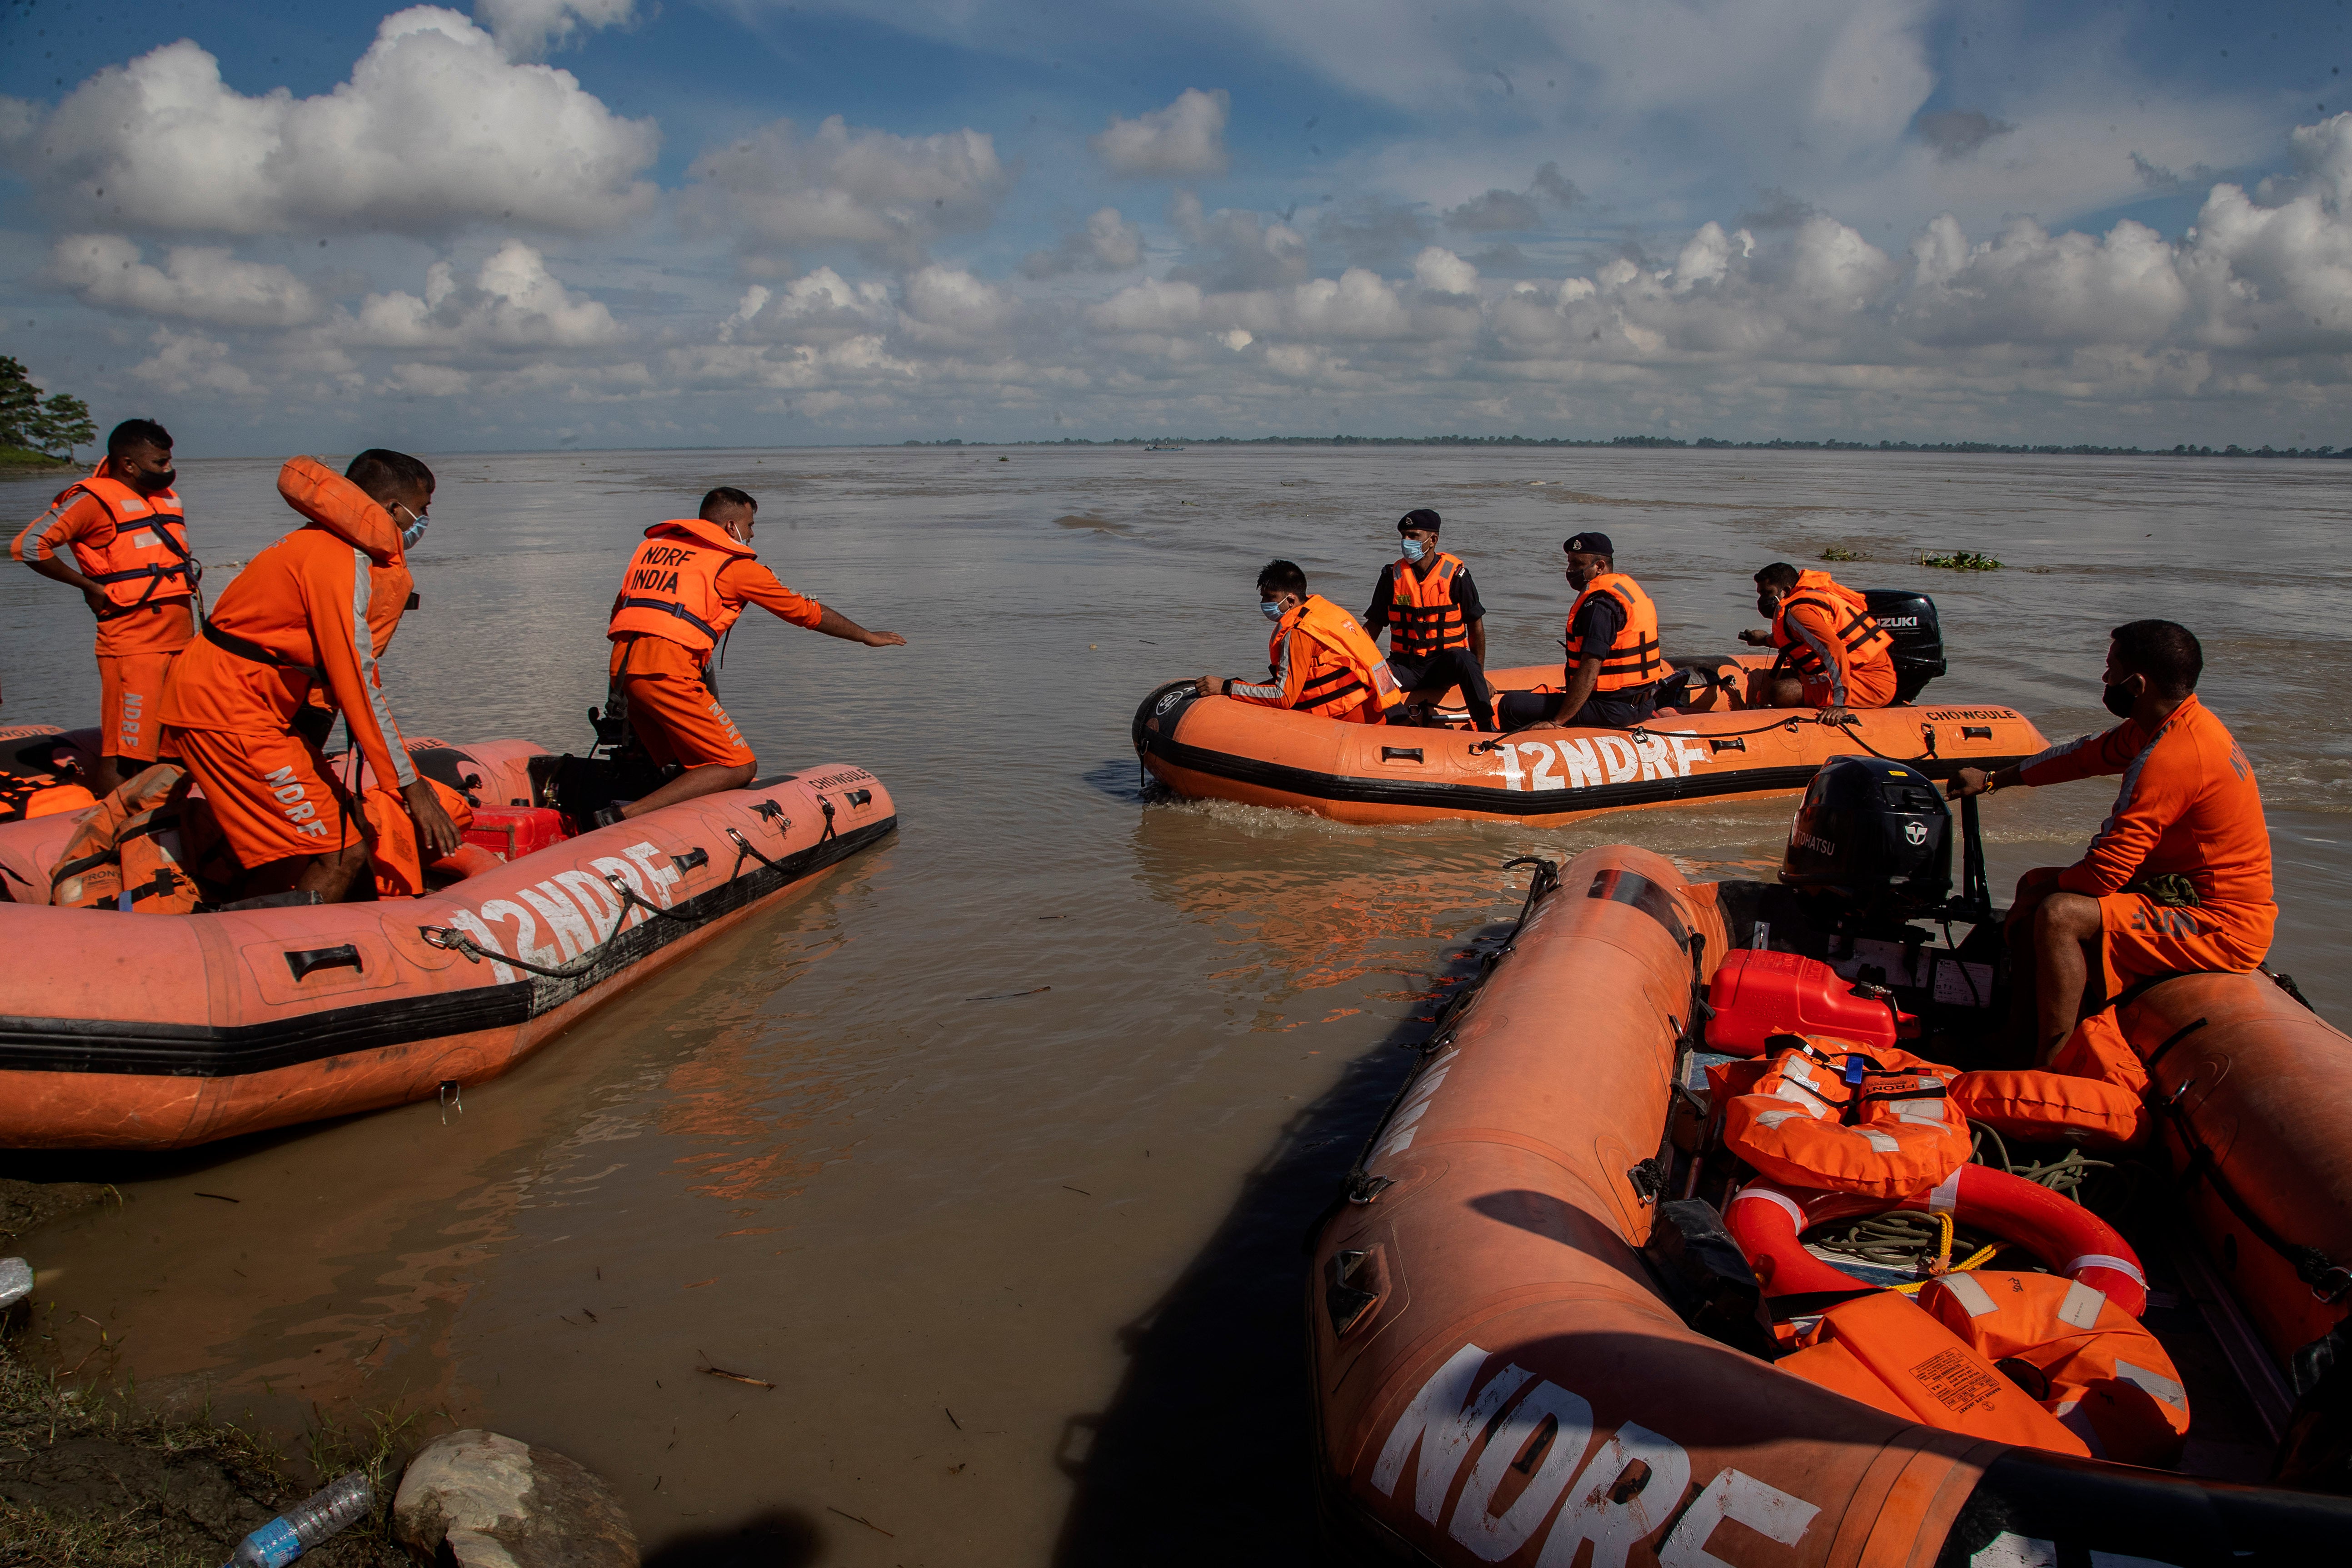 National Disaster Response Force personnel search for missing people after two passenger ferries collided Wednesday in the river Brahmaputra, near Nimati Ghat, in Jorhat, about 350 kilometres (220 miles) from Gauhati, Assam state, India, Thursday, 9 September 2021